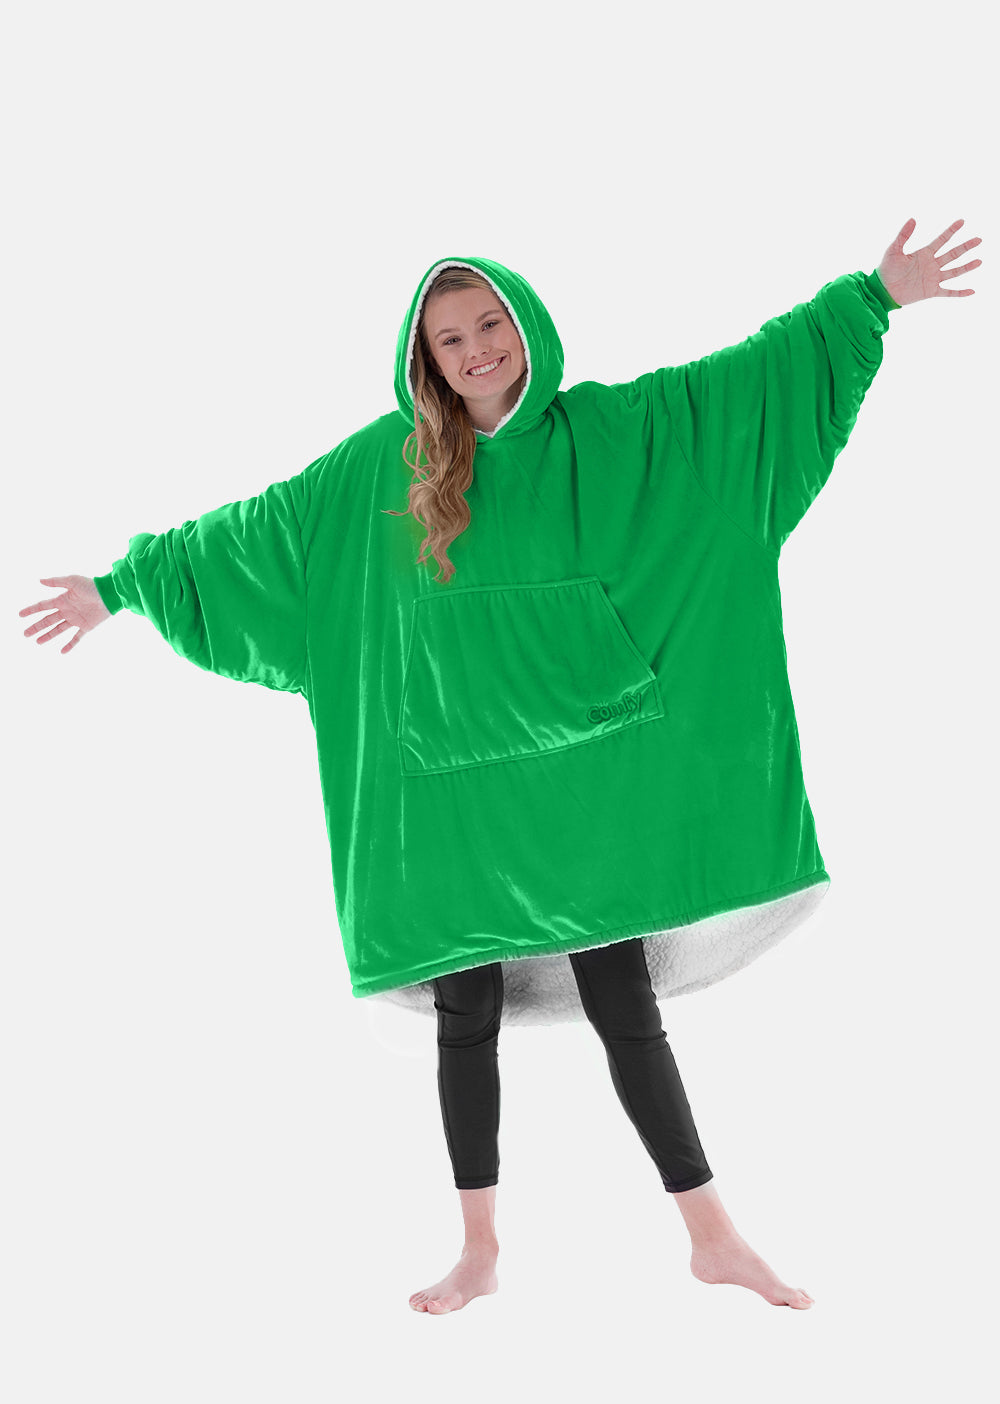 The Comfy Oversized Wearable Blanket Is on Sale at